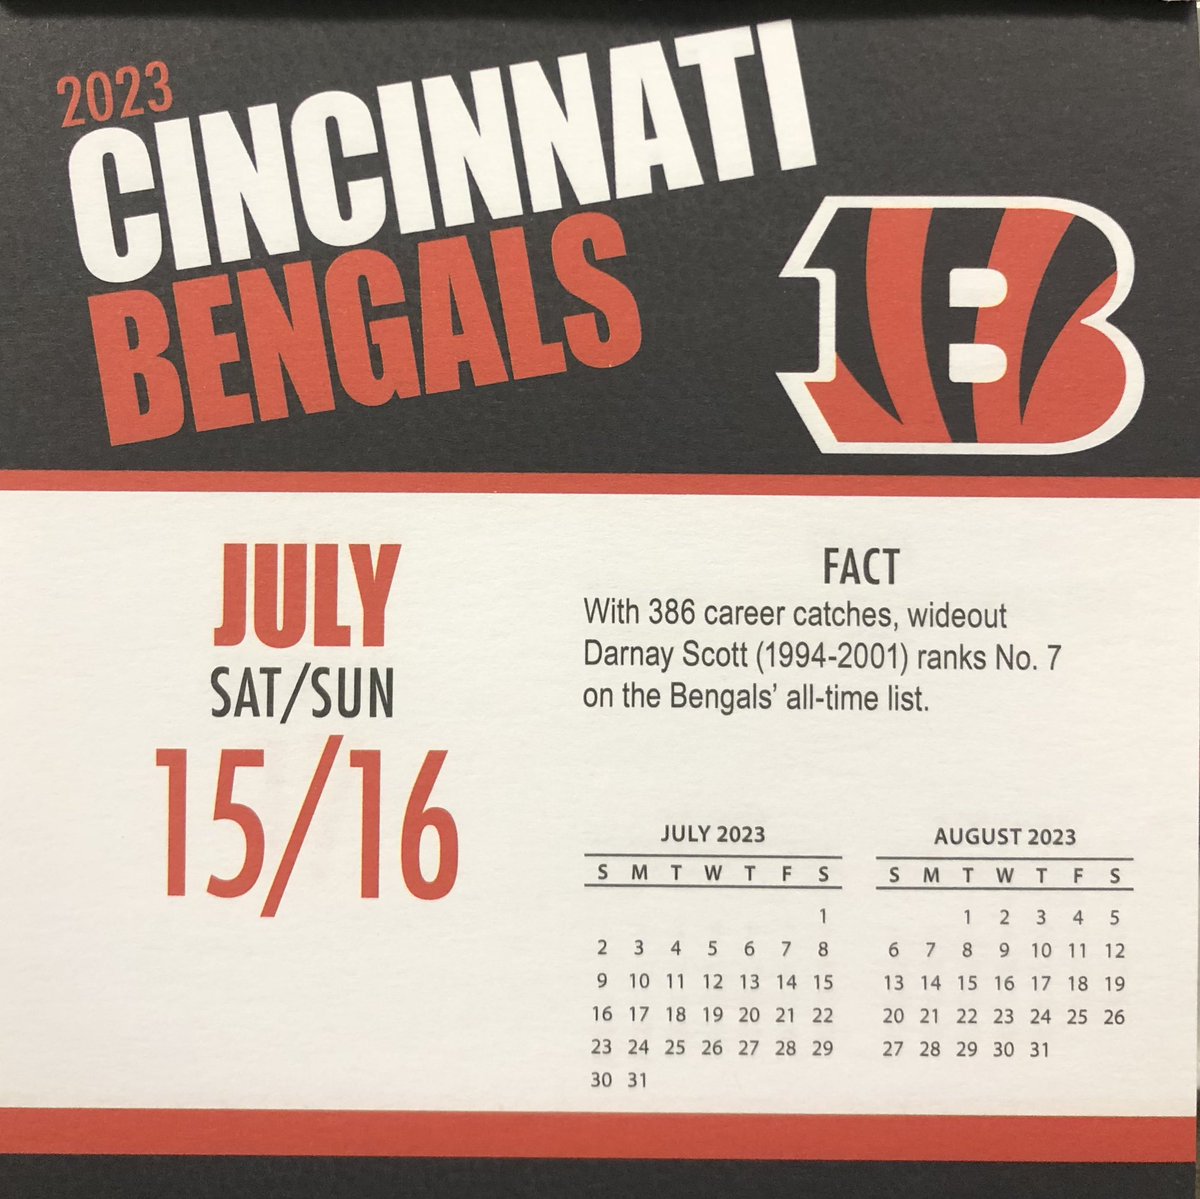 #Bengals Trivia/Fun Facts with Cincy James is back!

Sorry I haven’t kept up with it the last few days, but I was in Charlotte hanging out with my bros from grade school! https://t.co/wslkRjIBCl